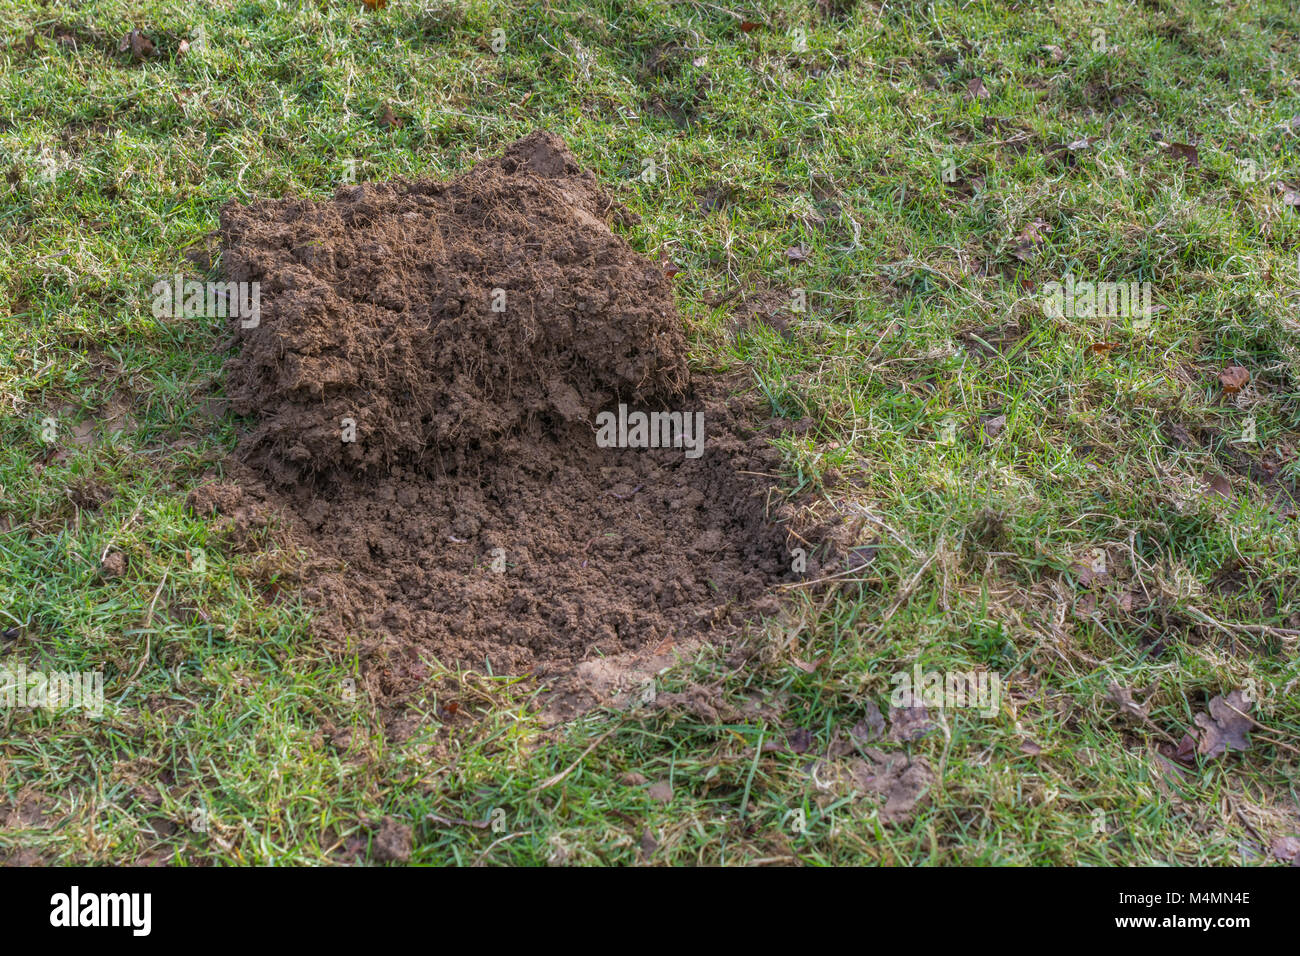 Grass turf cut away to form a shallow pit for a covert survival fire which 'leaves no trace'. Fire pit before base layer is added. Copy space. Stock Photo